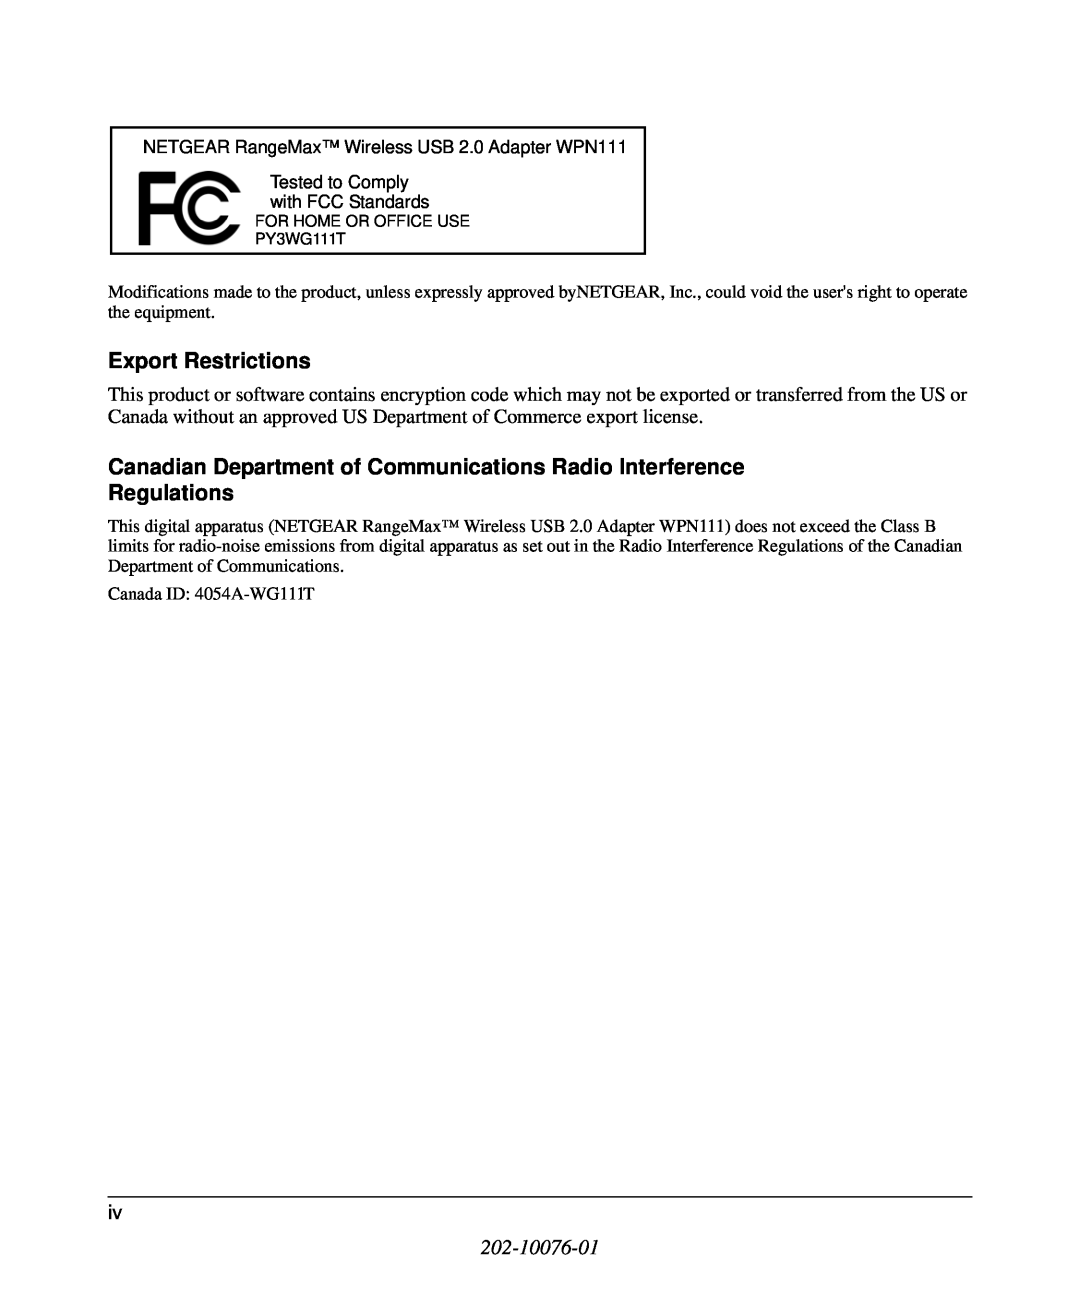 NETGEAR WPN111 Export Restrictions, Canadian Department of Communications Radio Interference , Regulations, 202-10076-01 